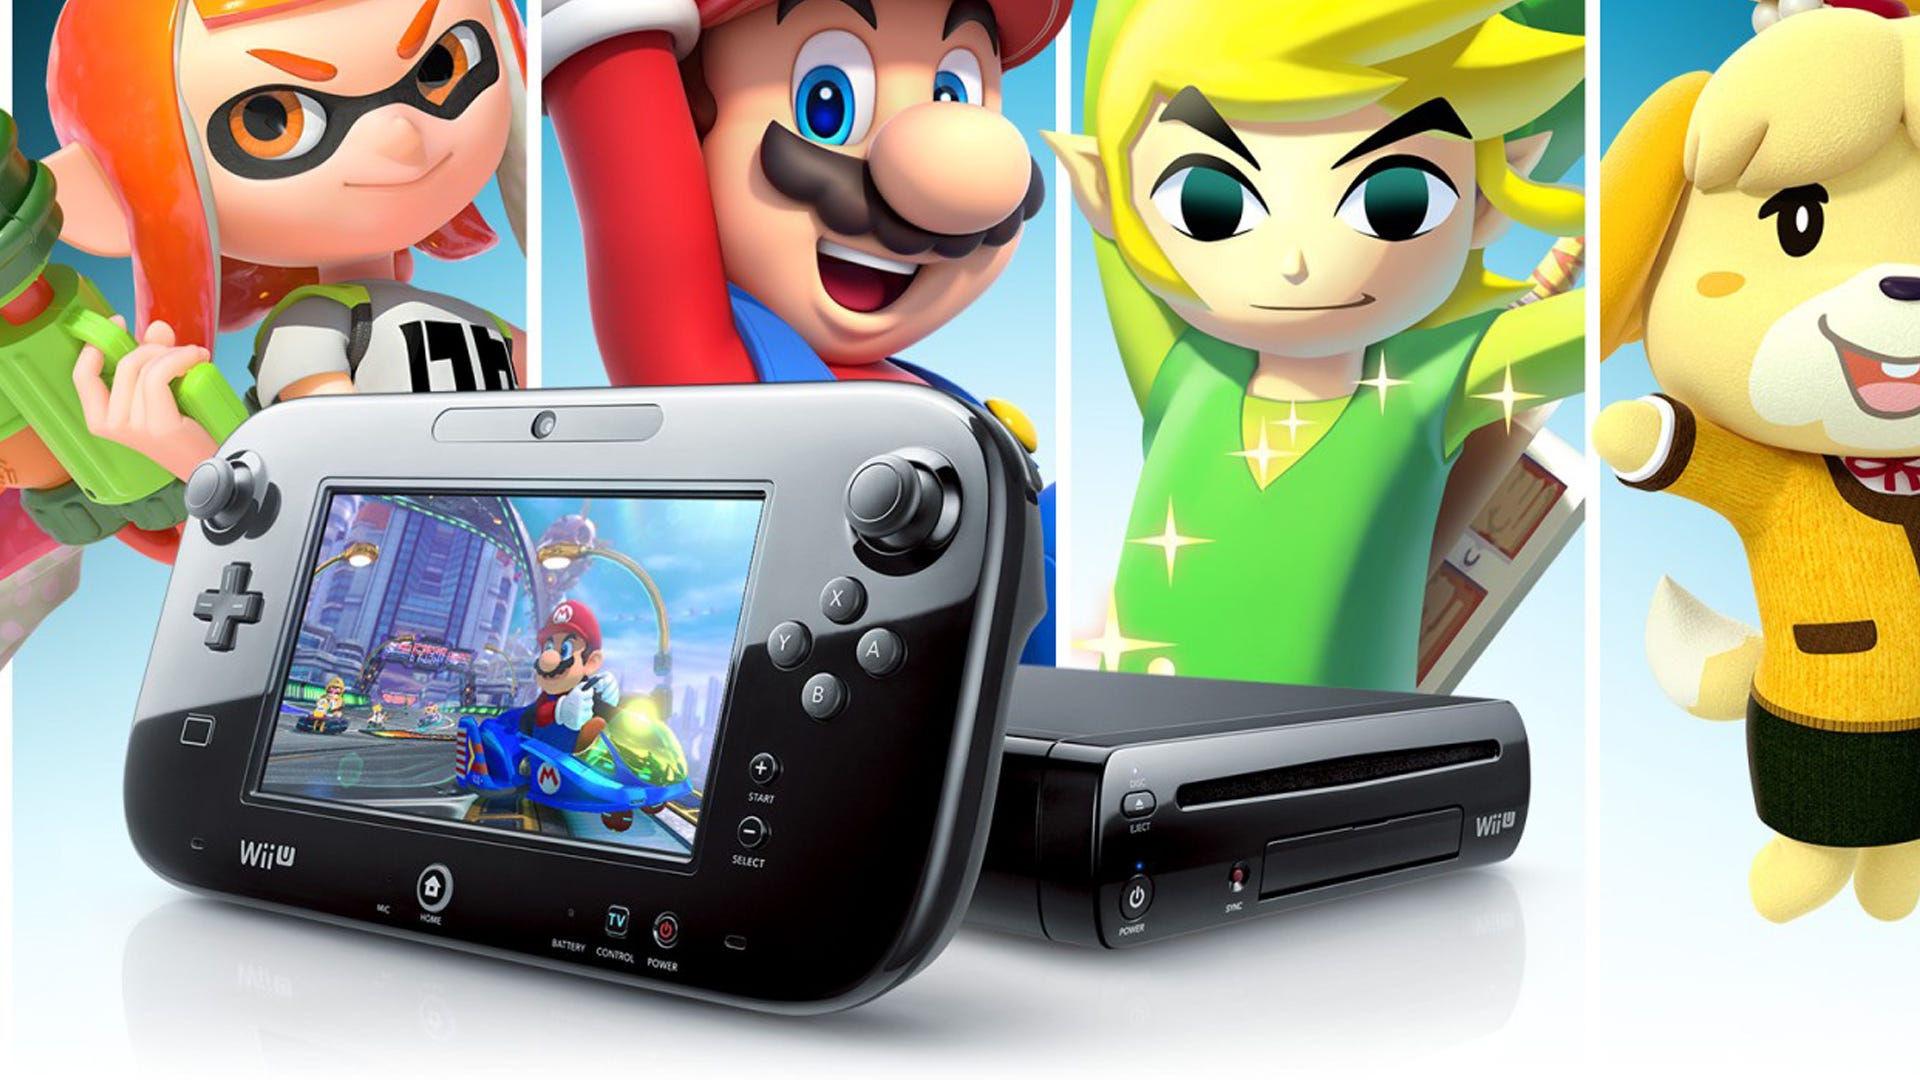 It might have been a bad console, but I’m still sad the Wii U is dying today